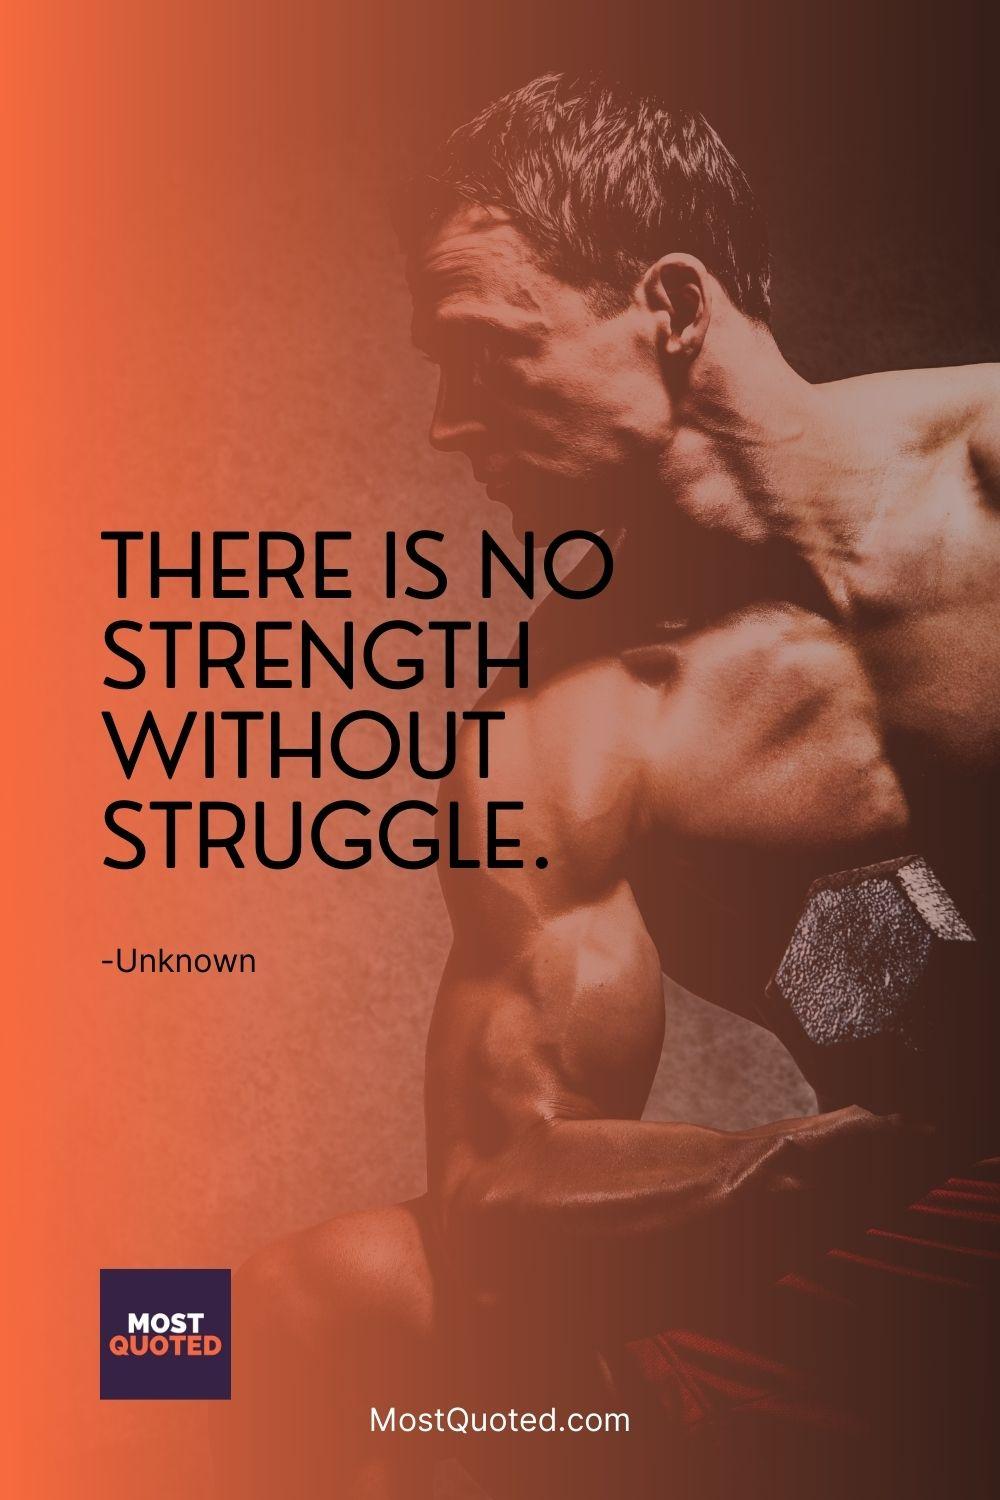 There is no strength without struggle.